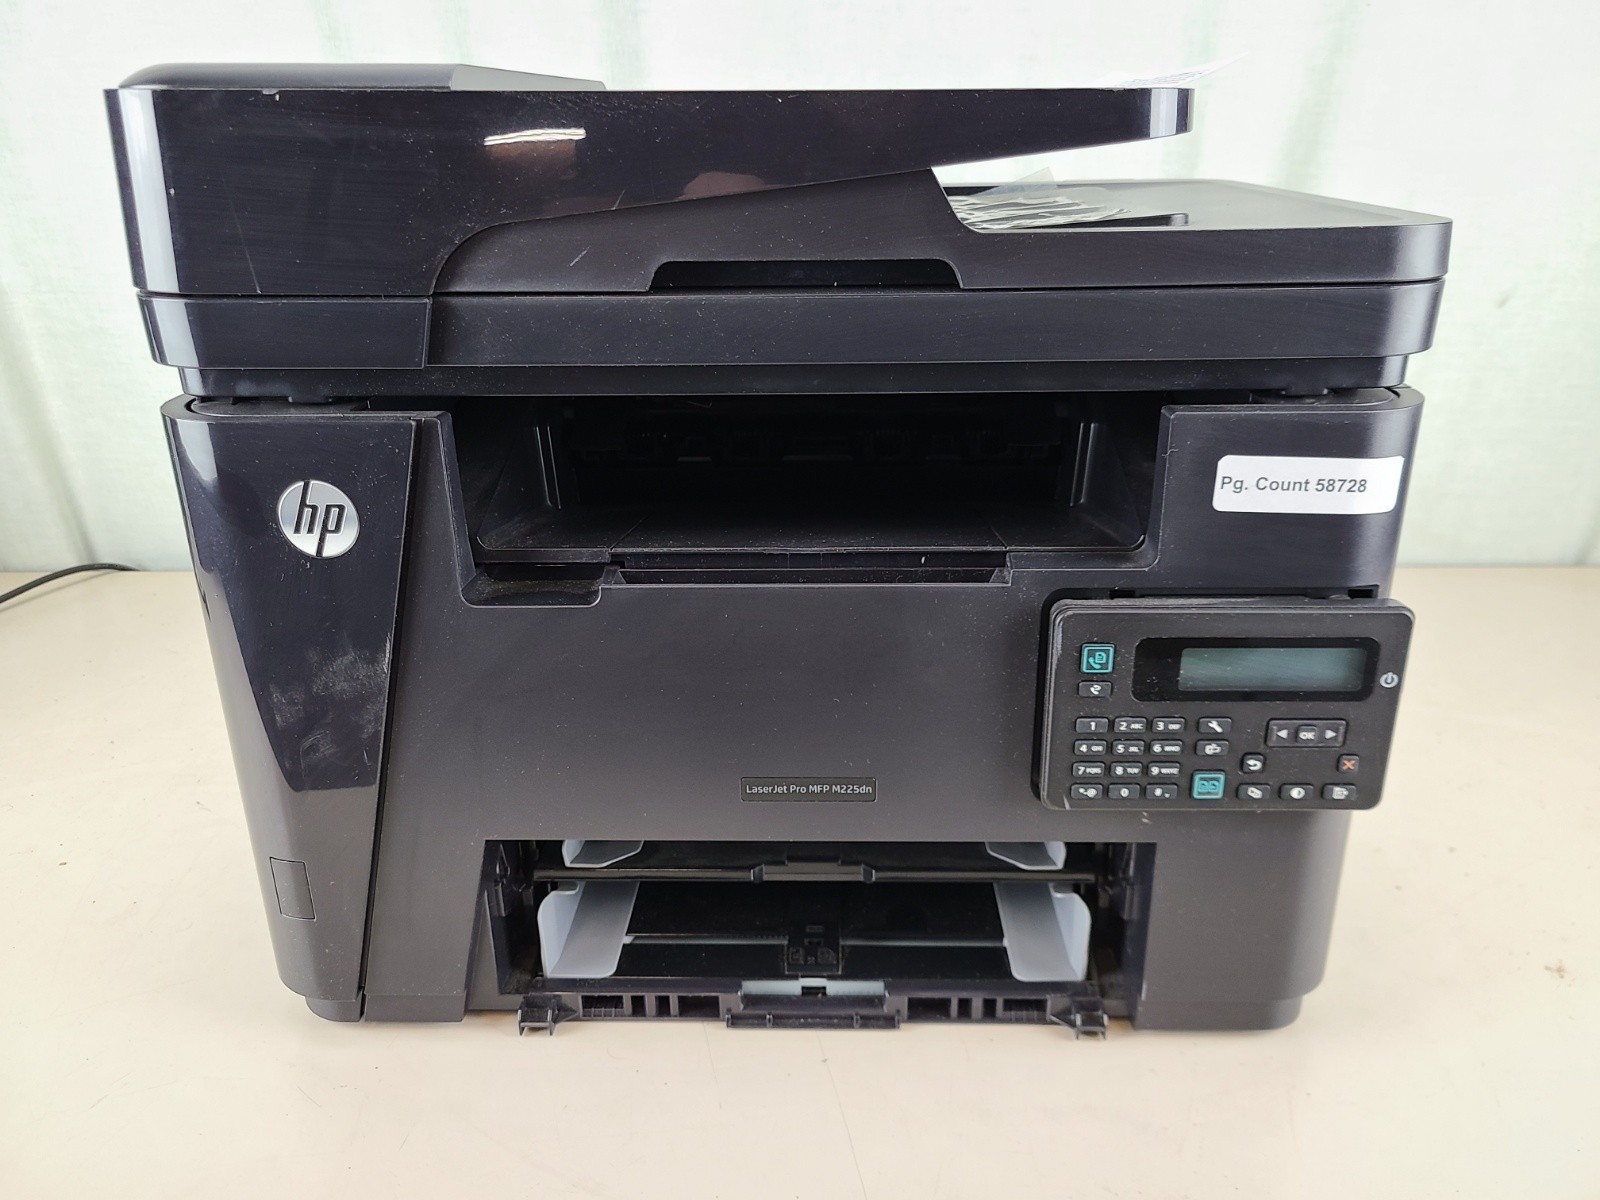 HP LaserJet Pro MFP M225dn Printer AS-IS 58728 Pages